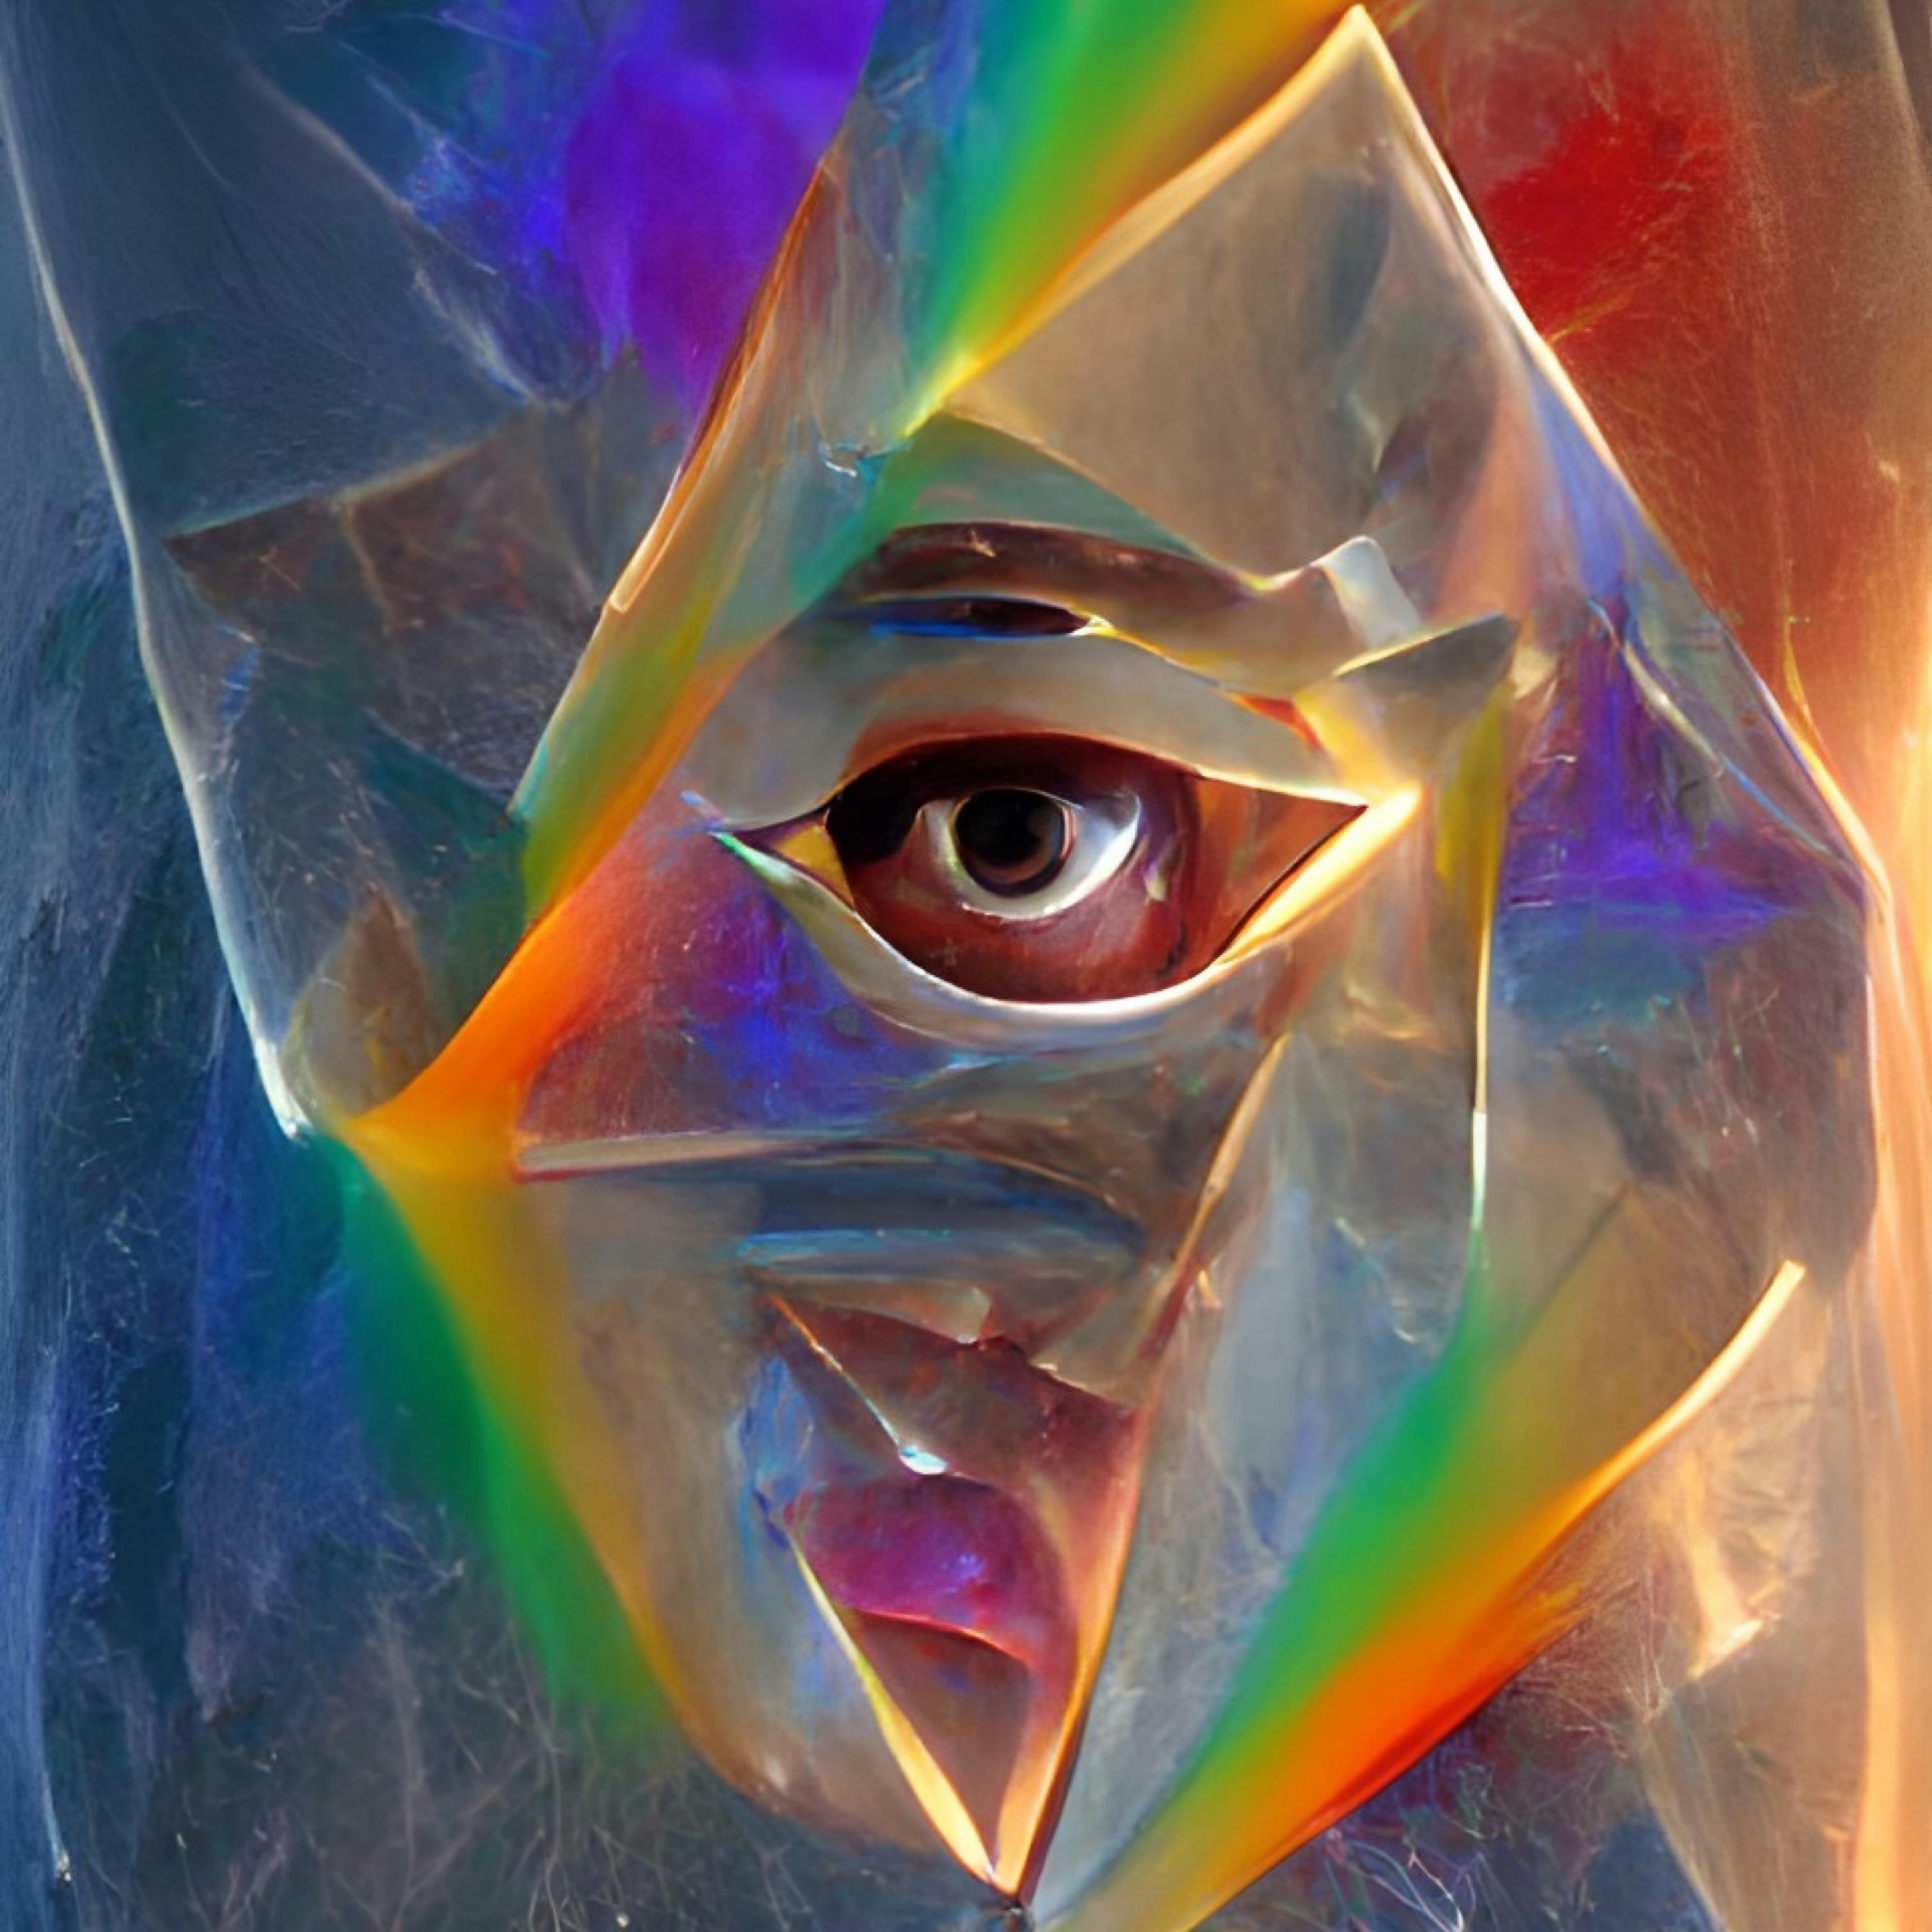 Cover art for LAKIM's song: finding yourself (3rd eye)